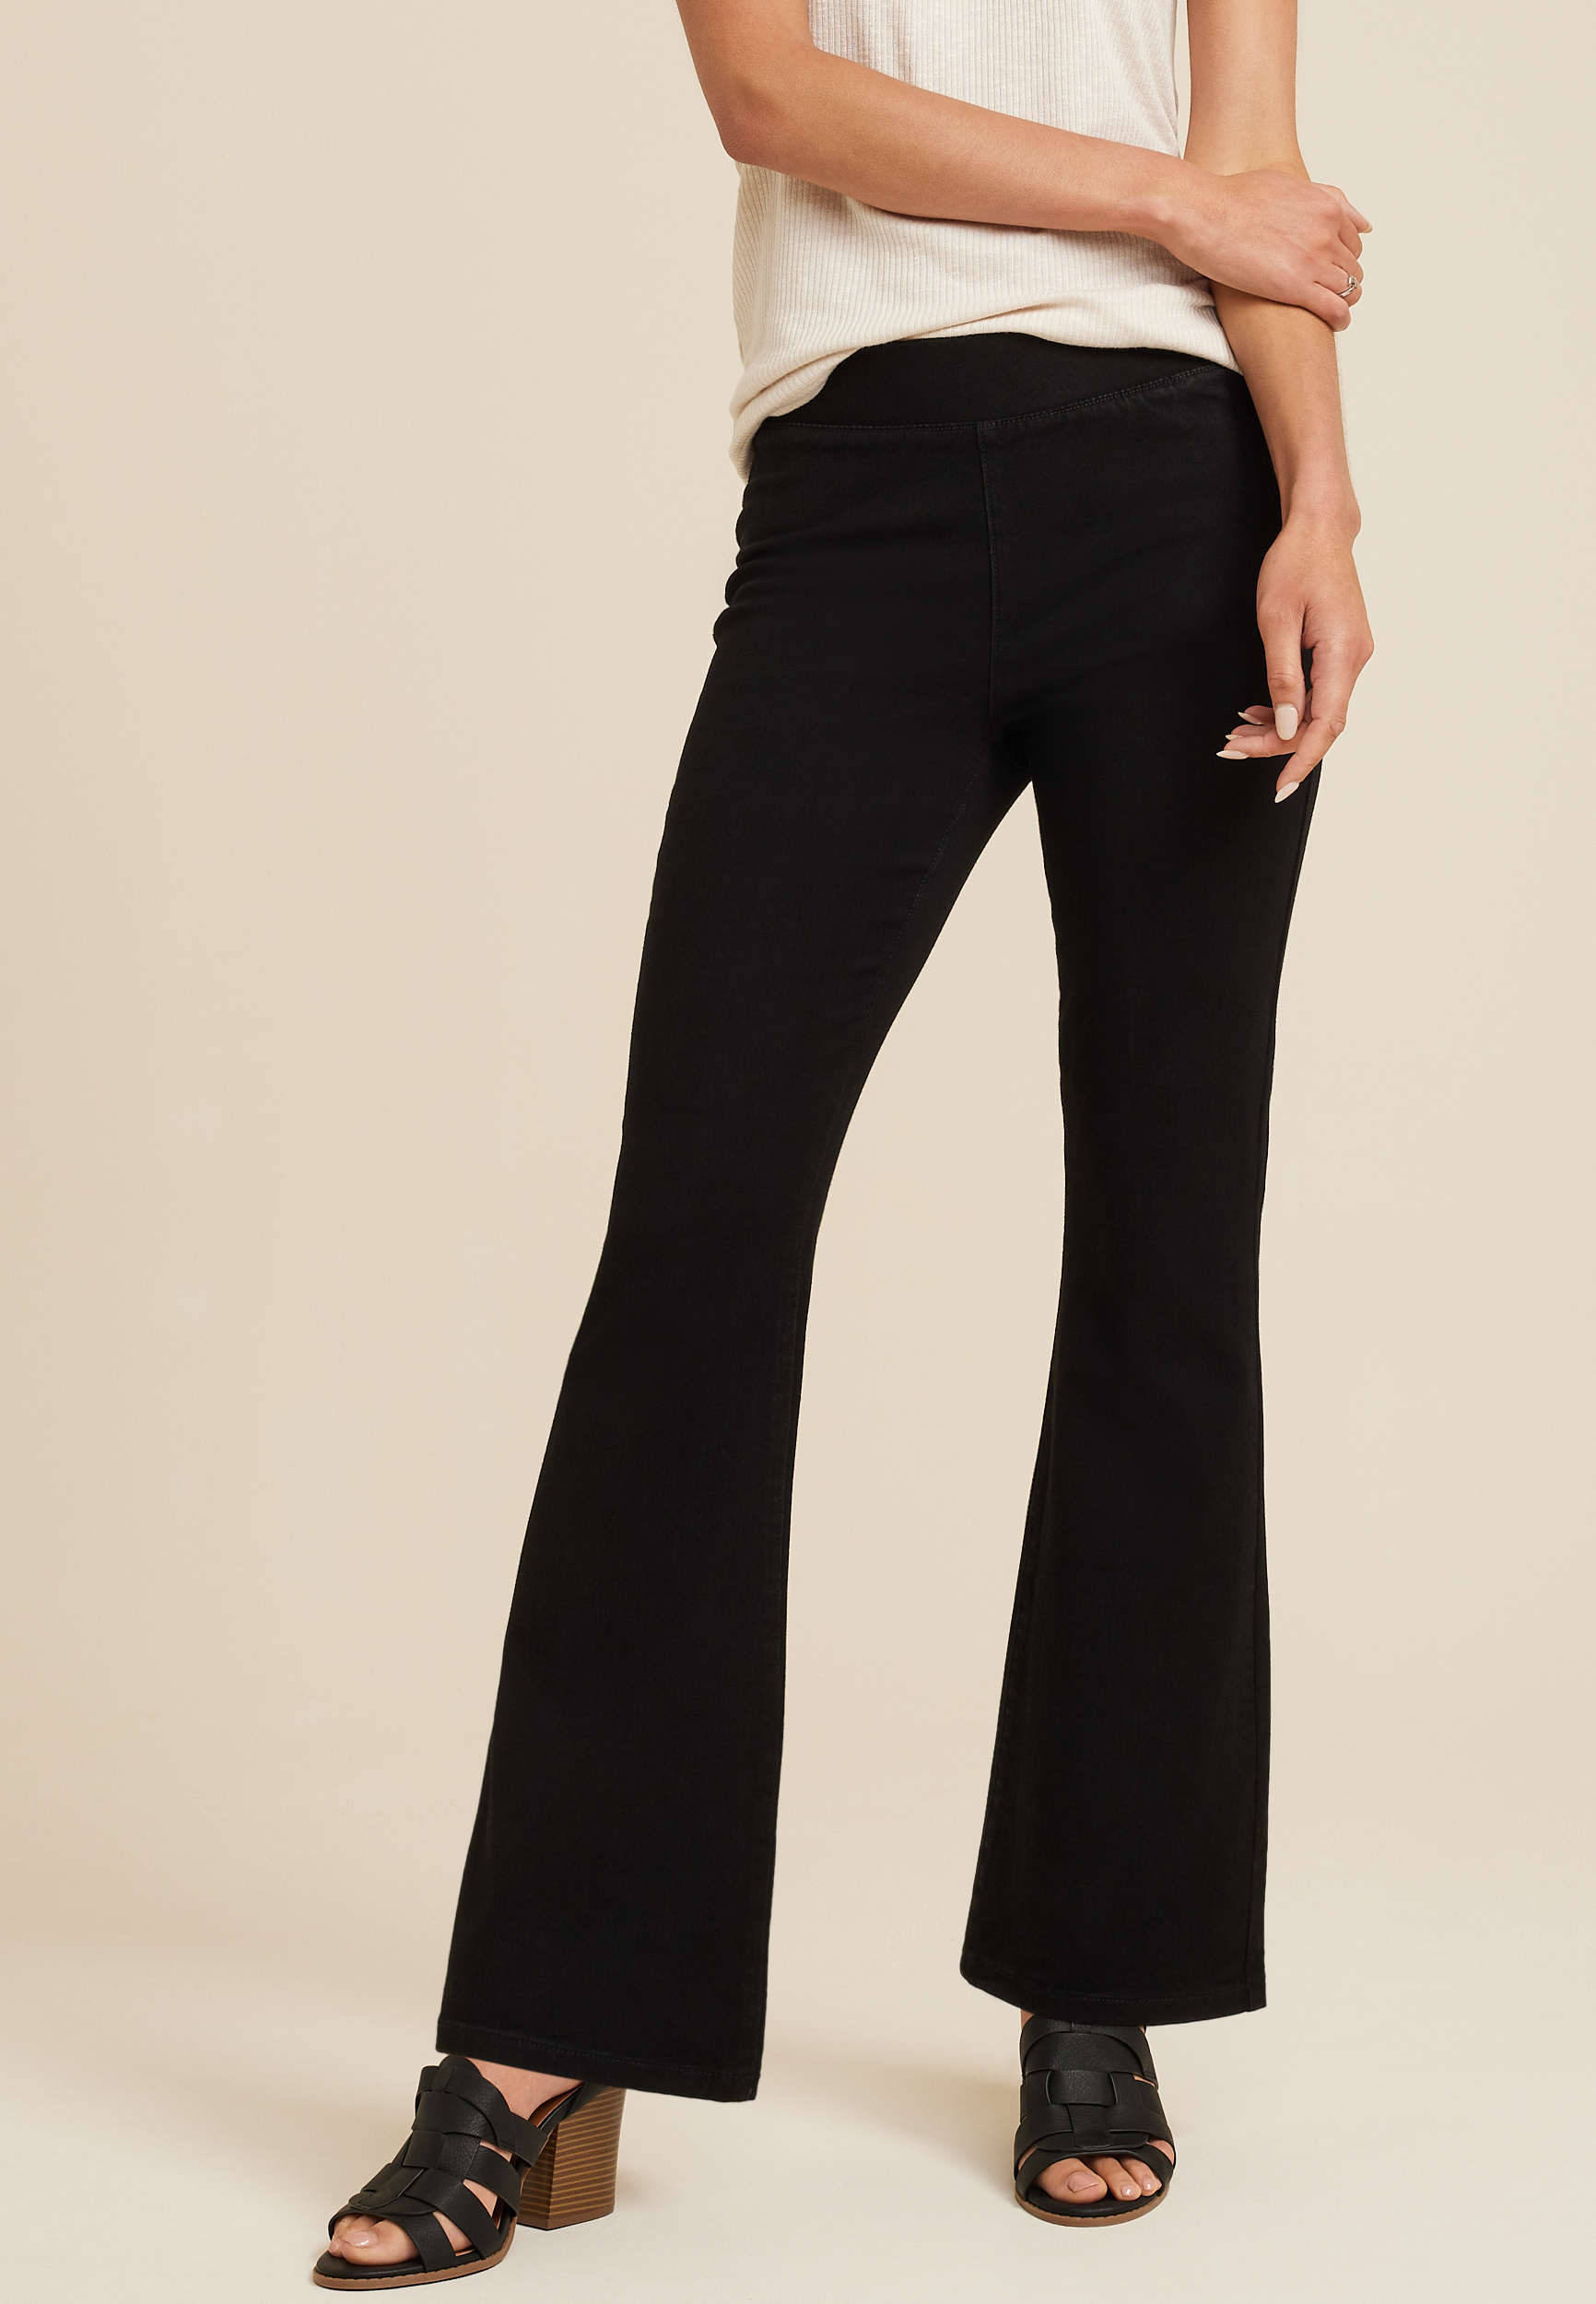 Flying Monkey High Rise Flare Stretch Pant - Women's Pants in Loving